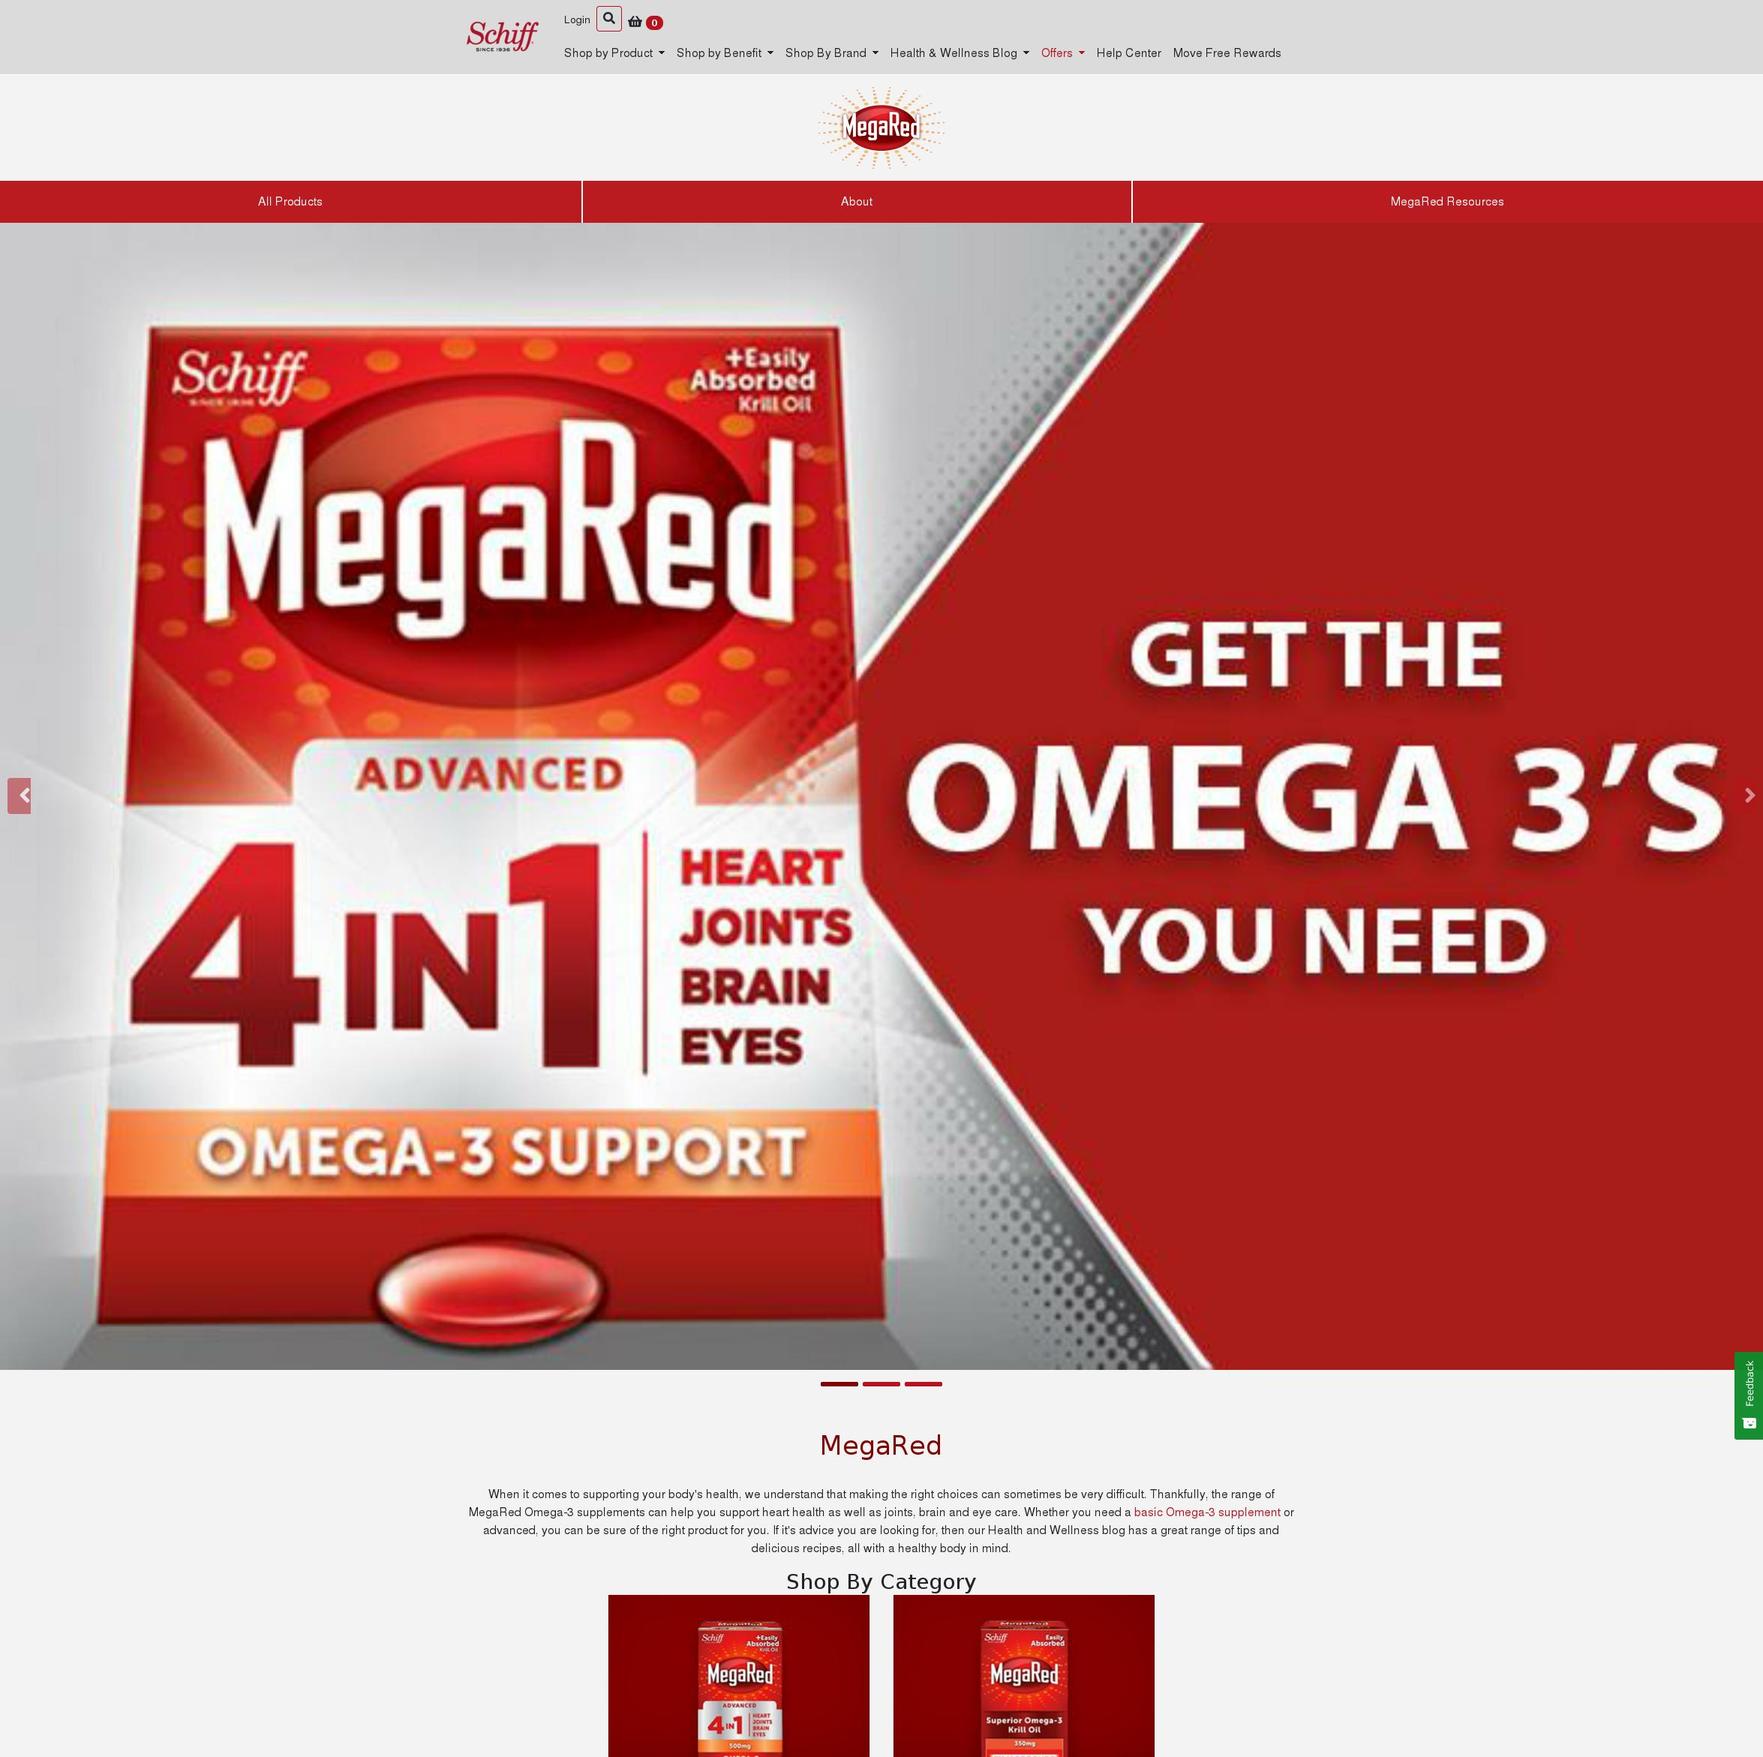 Schiff Vitamins - Updated 8\/3 Shopify theme site example megared.com